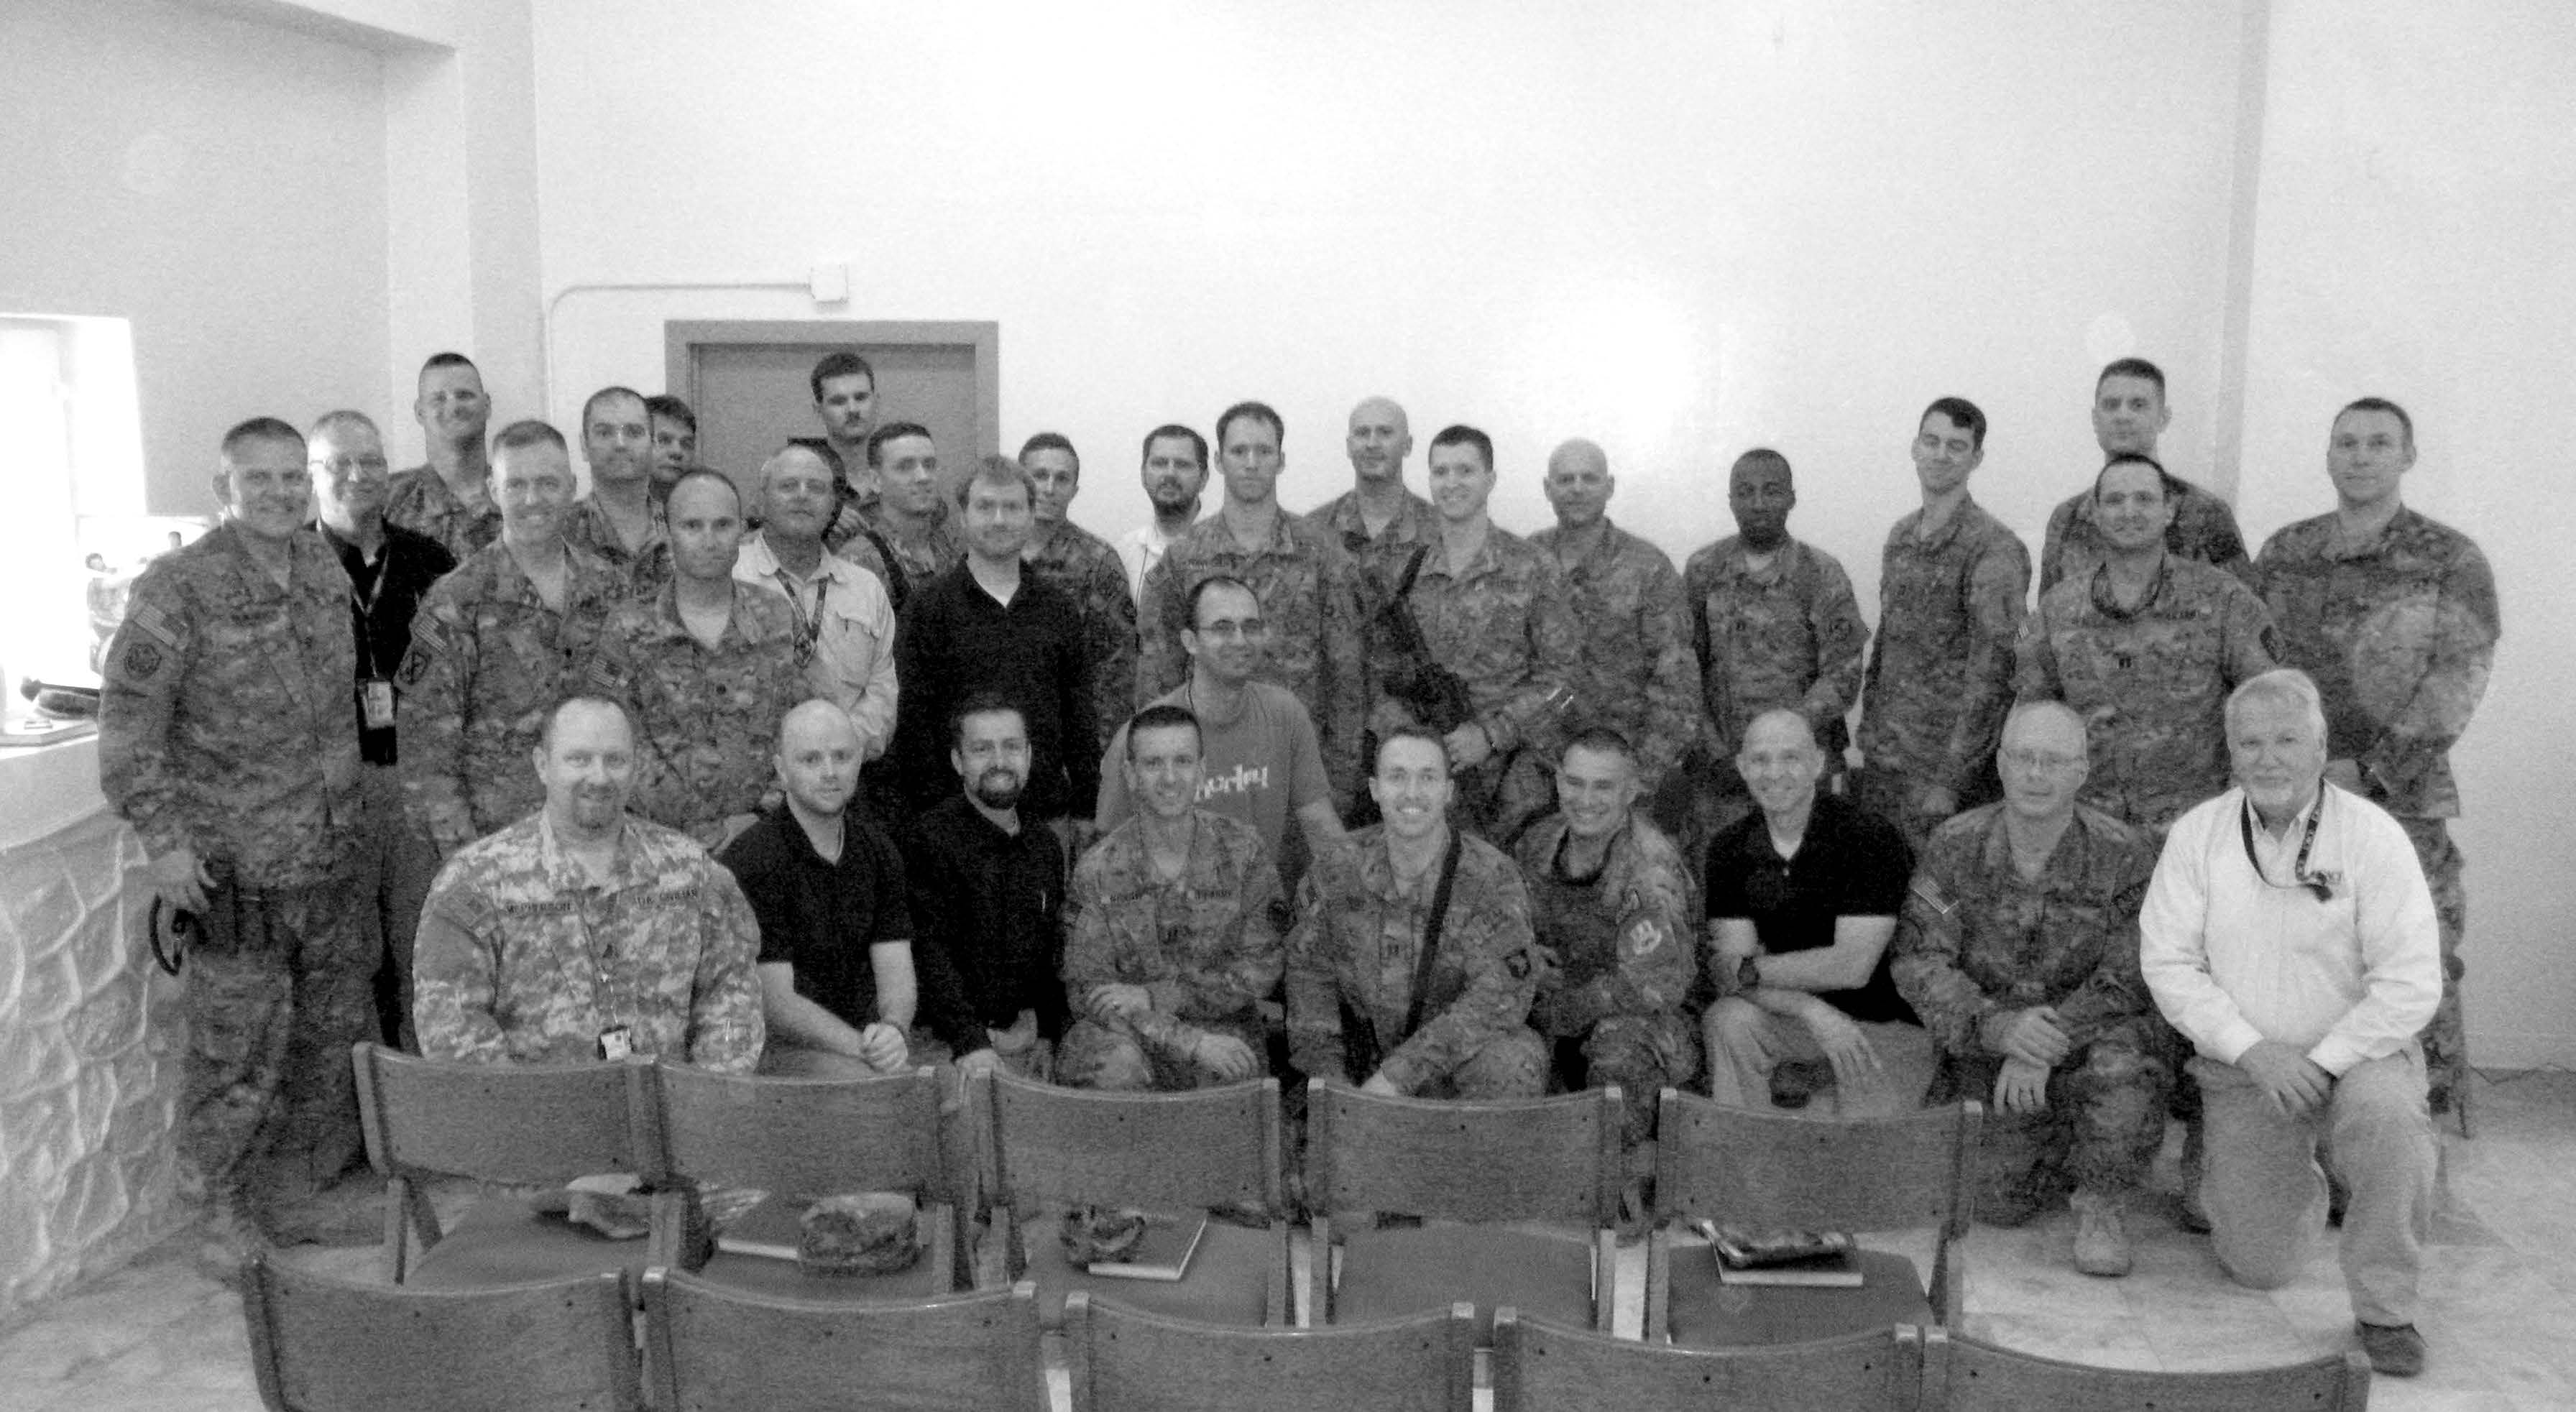 Guy M. Hollingsworth (center) presided over the Bagram Afghanistan Branch during a 400-day combat tour in 2013–14. Statie Young (left) was his second counselor, and Gist Wylie (right) served as his first counselor. Courtesy of Guy M. Hollingsworth.